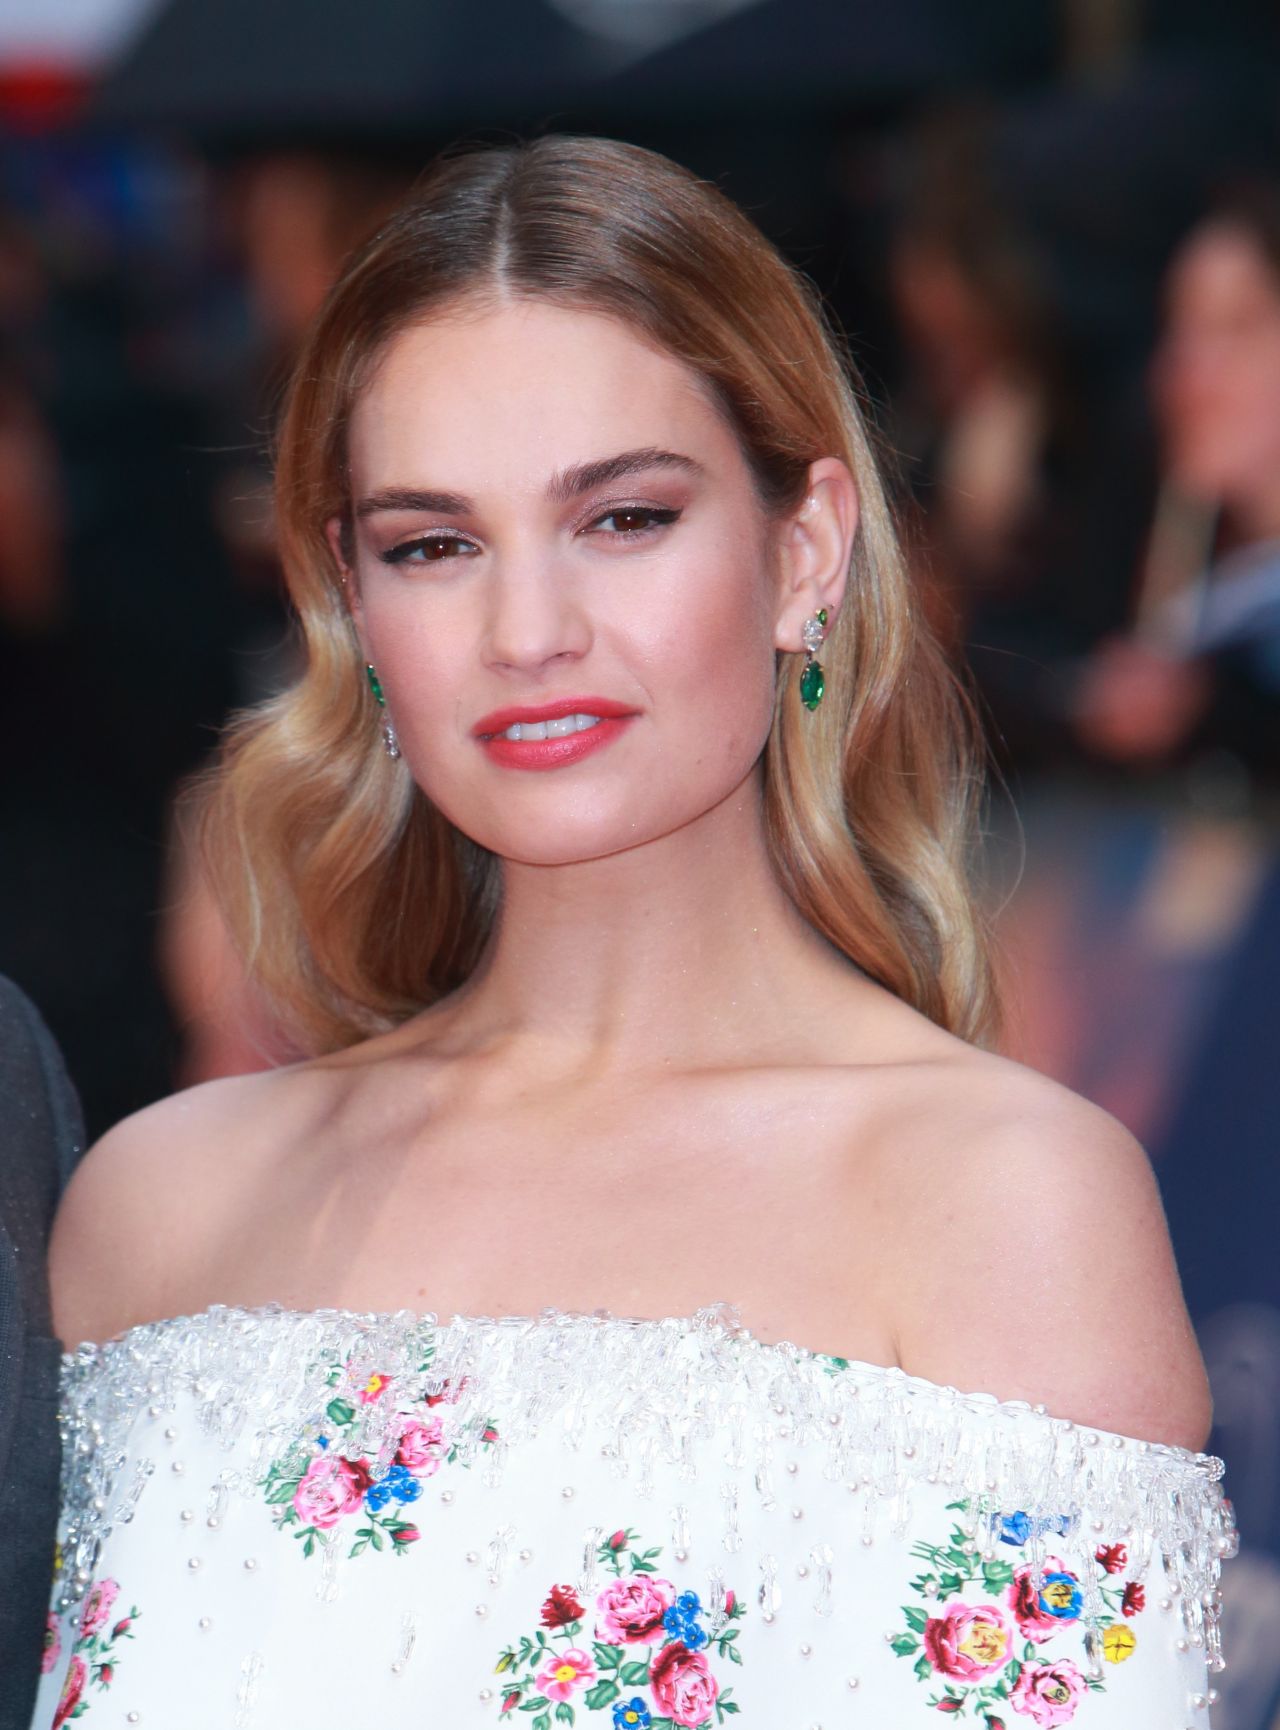 Lily James - "The Guernsey Literary and Potato Peel Pie